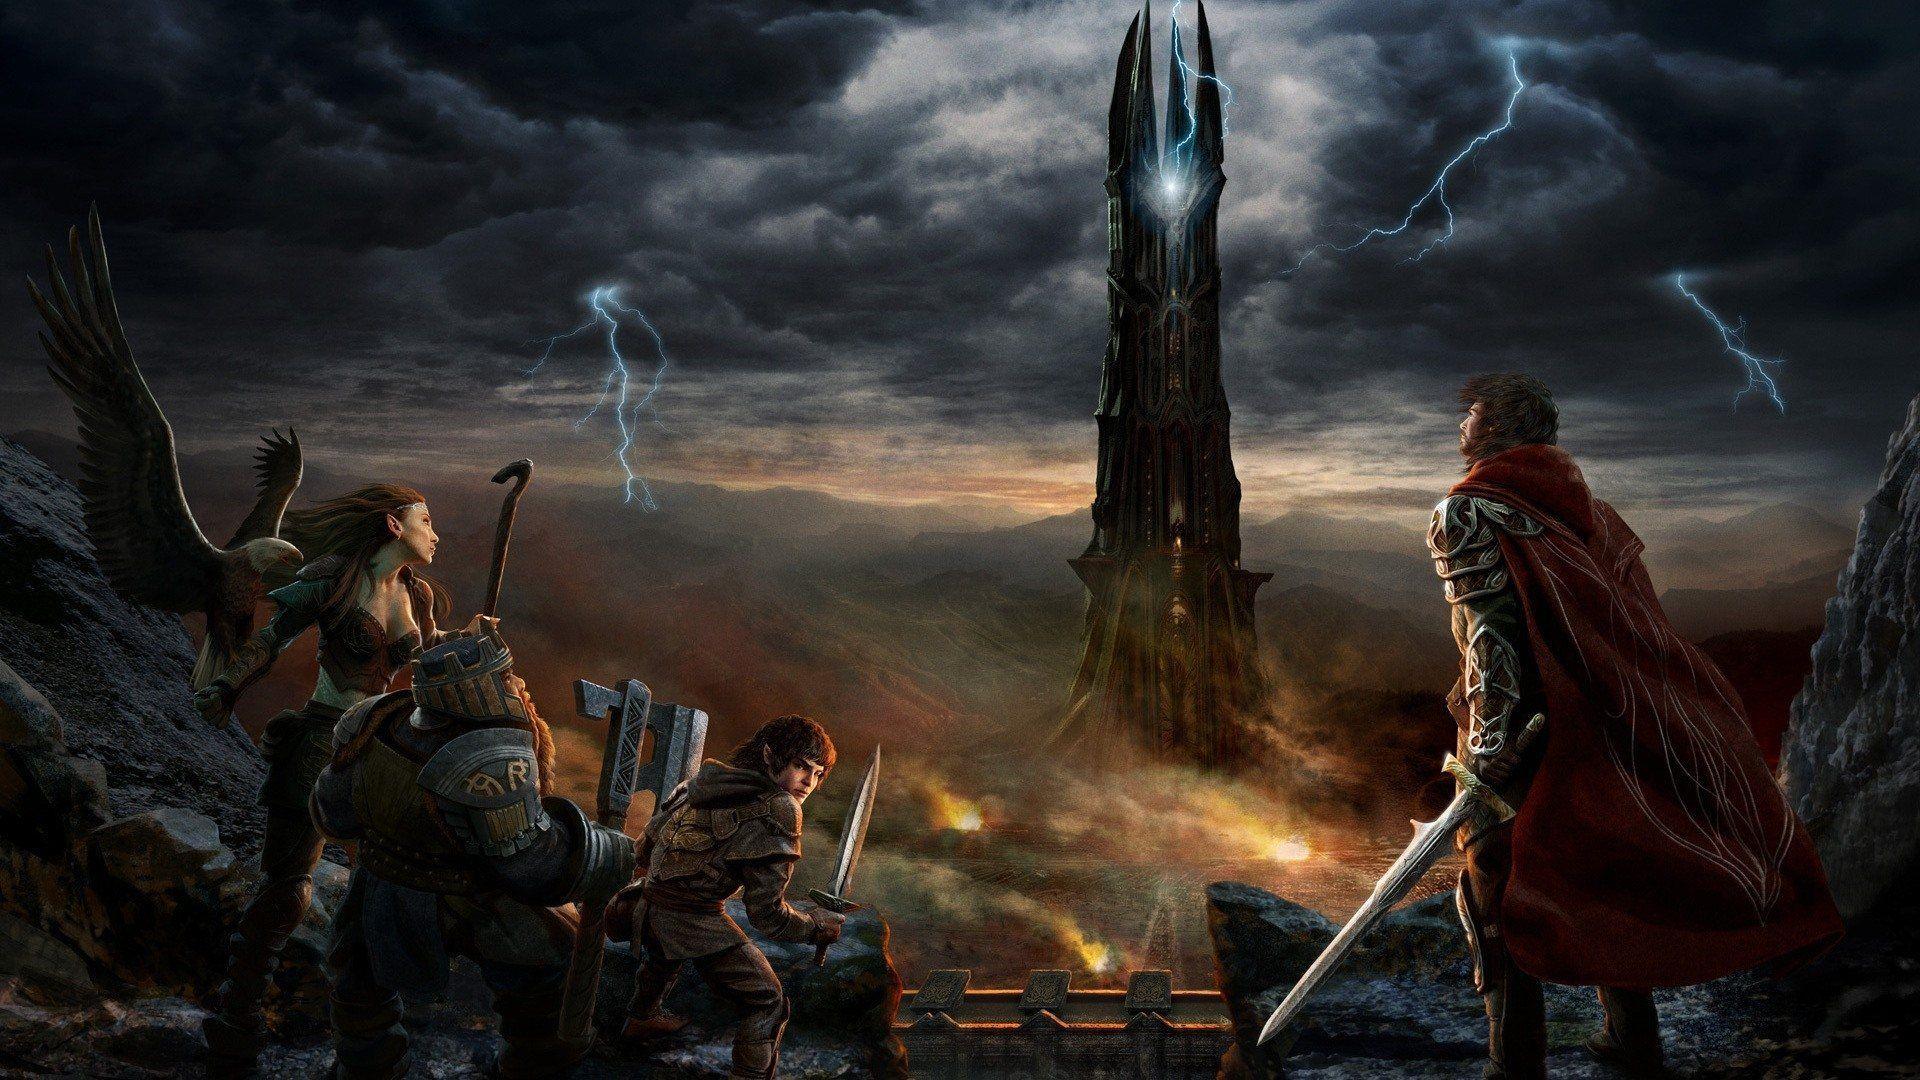 Lord of the Rings: Video Game HD Wallpaper. Download HD Wallpaper